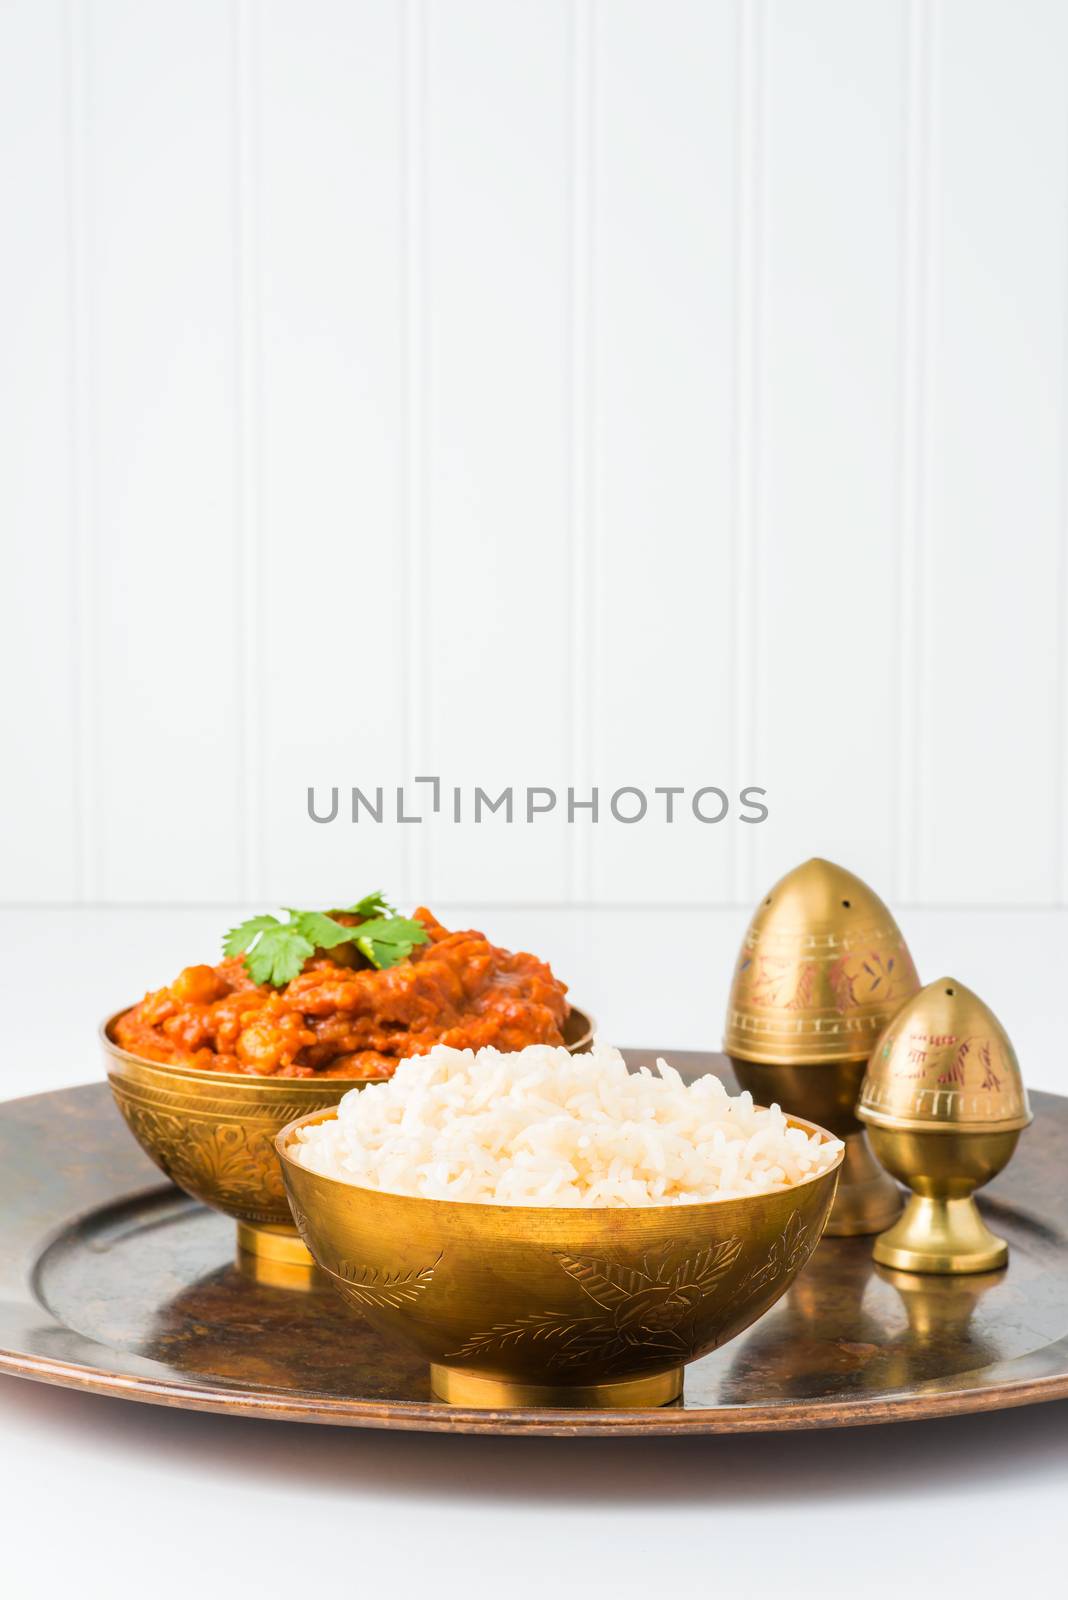 Basmati rice is part of a traditional Indian meal.